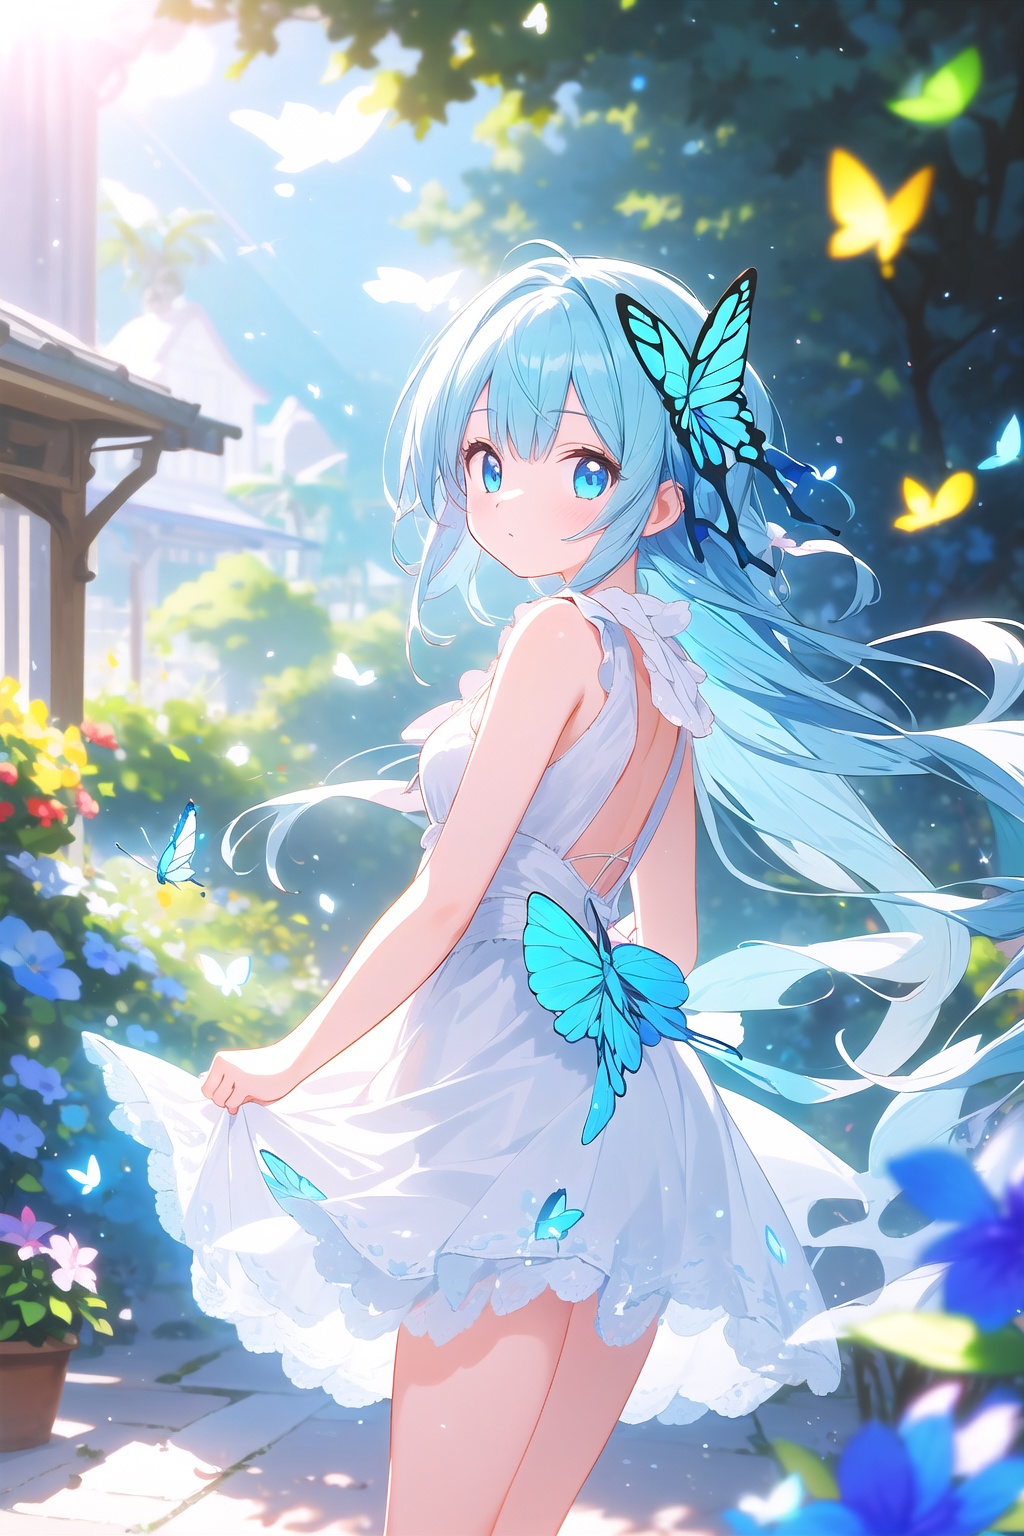 wide shot,(depth of field),global illumination,soft shadows,grand scene,backlight,lens flare,((colorful refraction)),((cinematic lighting)),in the market,from side,looking outside,with butterfly,1girl with lightblue long hair and blue aqua eyes,hair flowers,hime cut,sunlight,blurry background,blurry,White Dress,